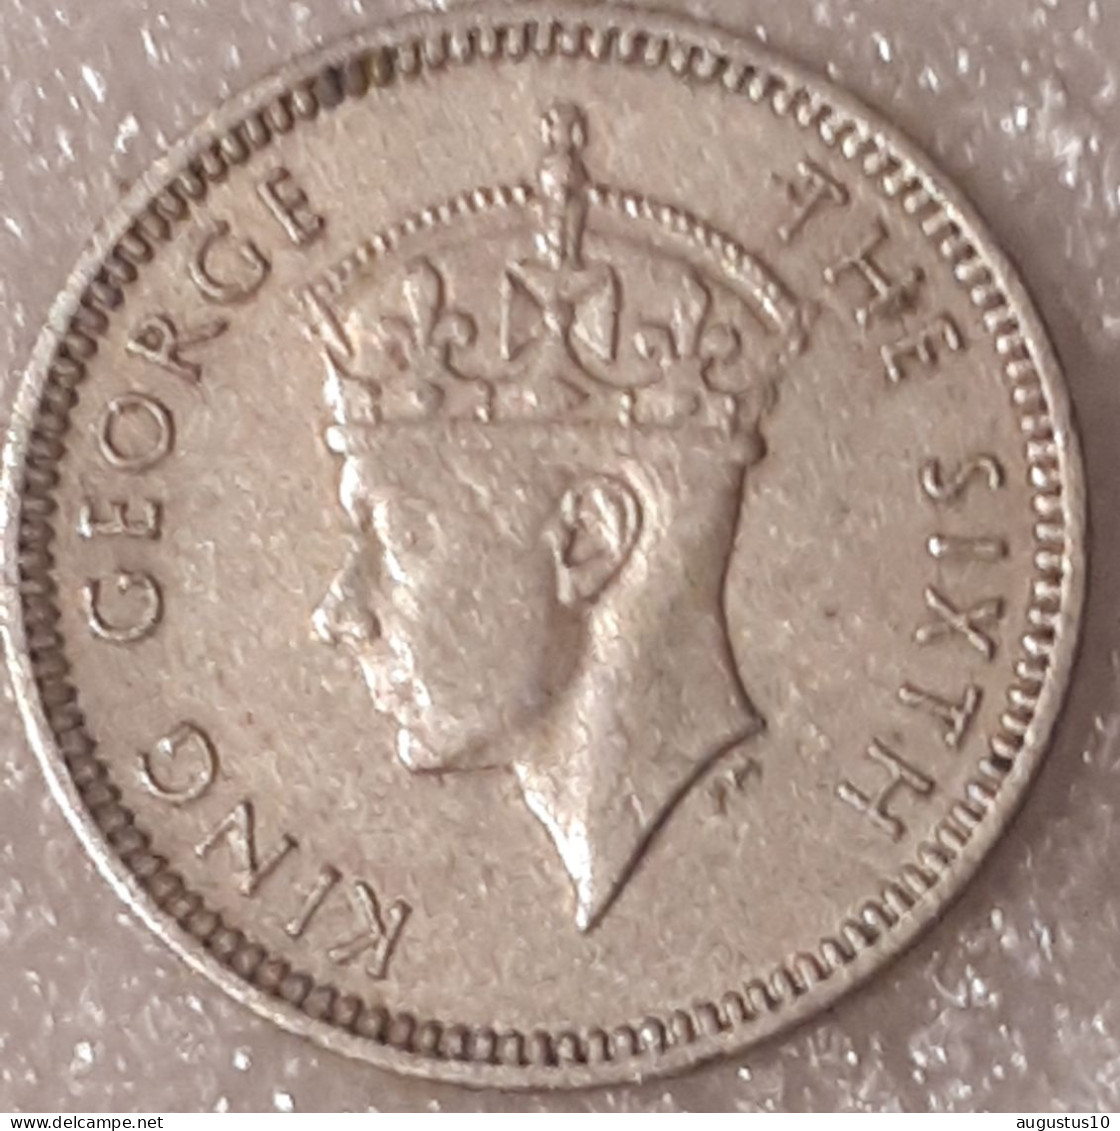 Southern Rhodesia: 3 PENCE 1952  RARE TYPE In Alm. UNC !! KM 20 - Rhodesien